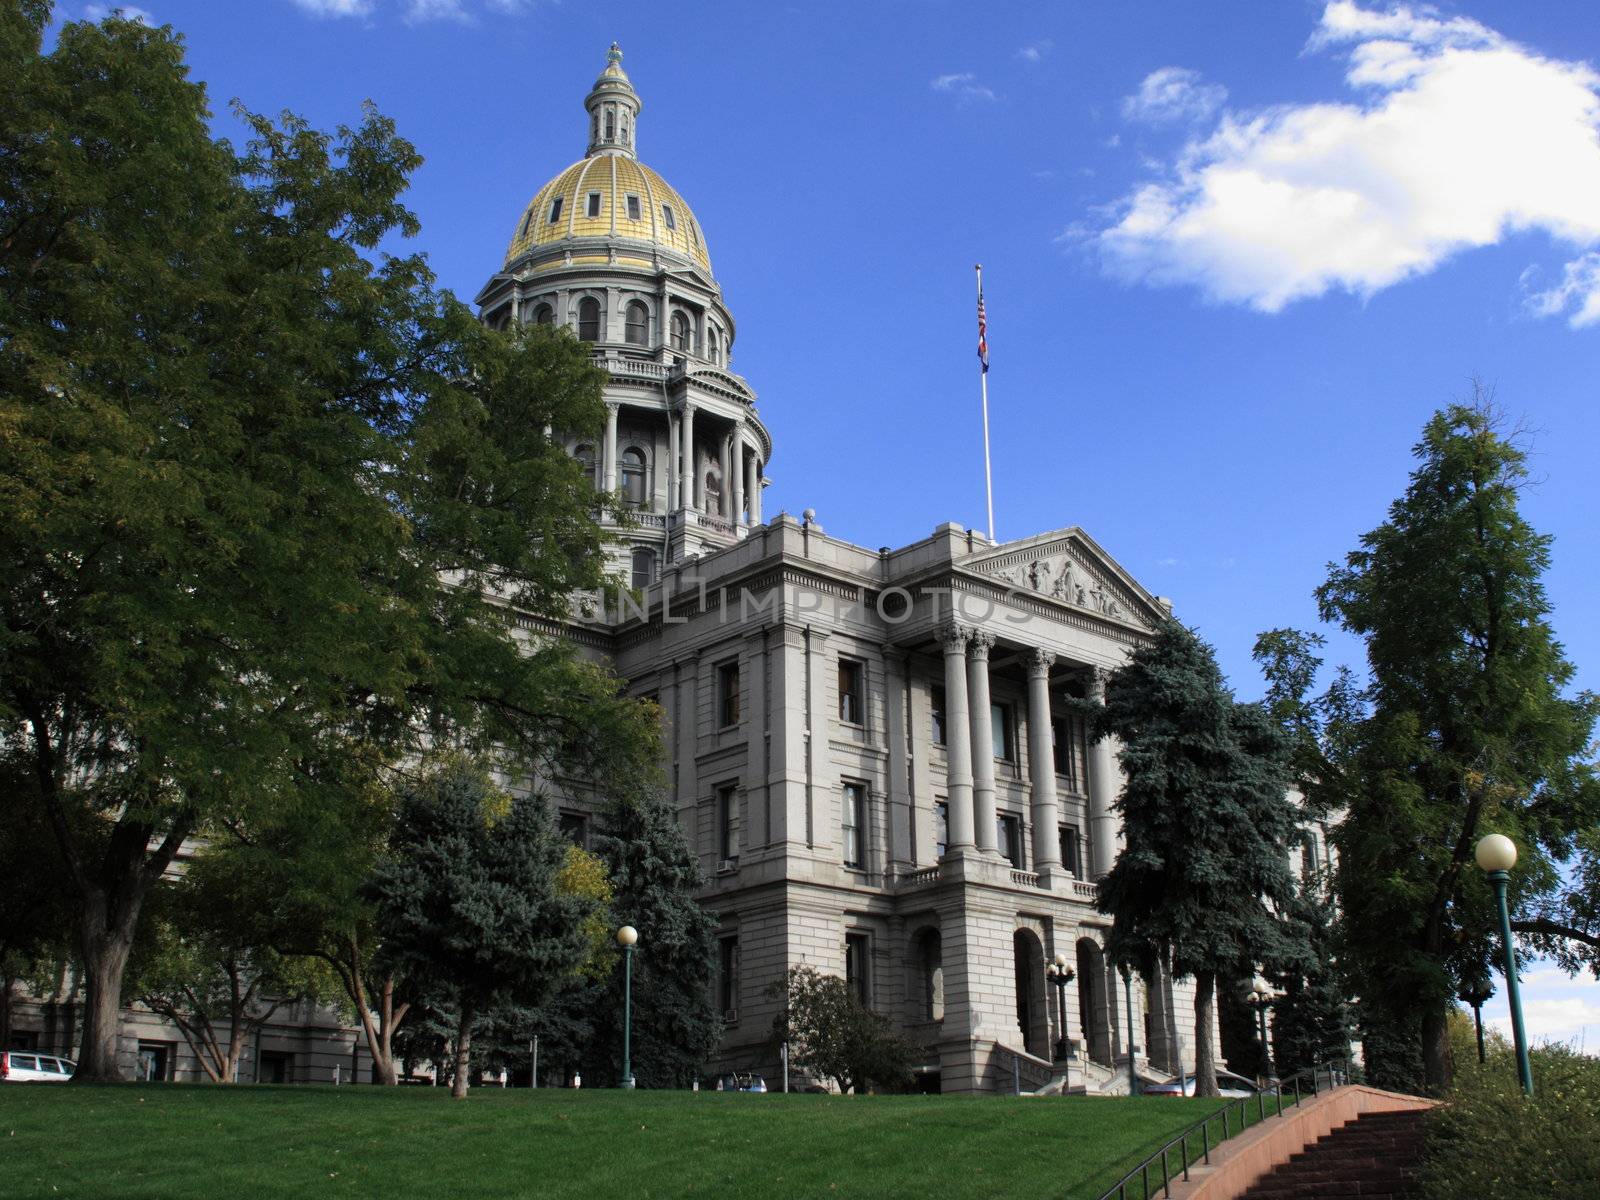 Colorado State Capitol Building in Denver by Ffooter